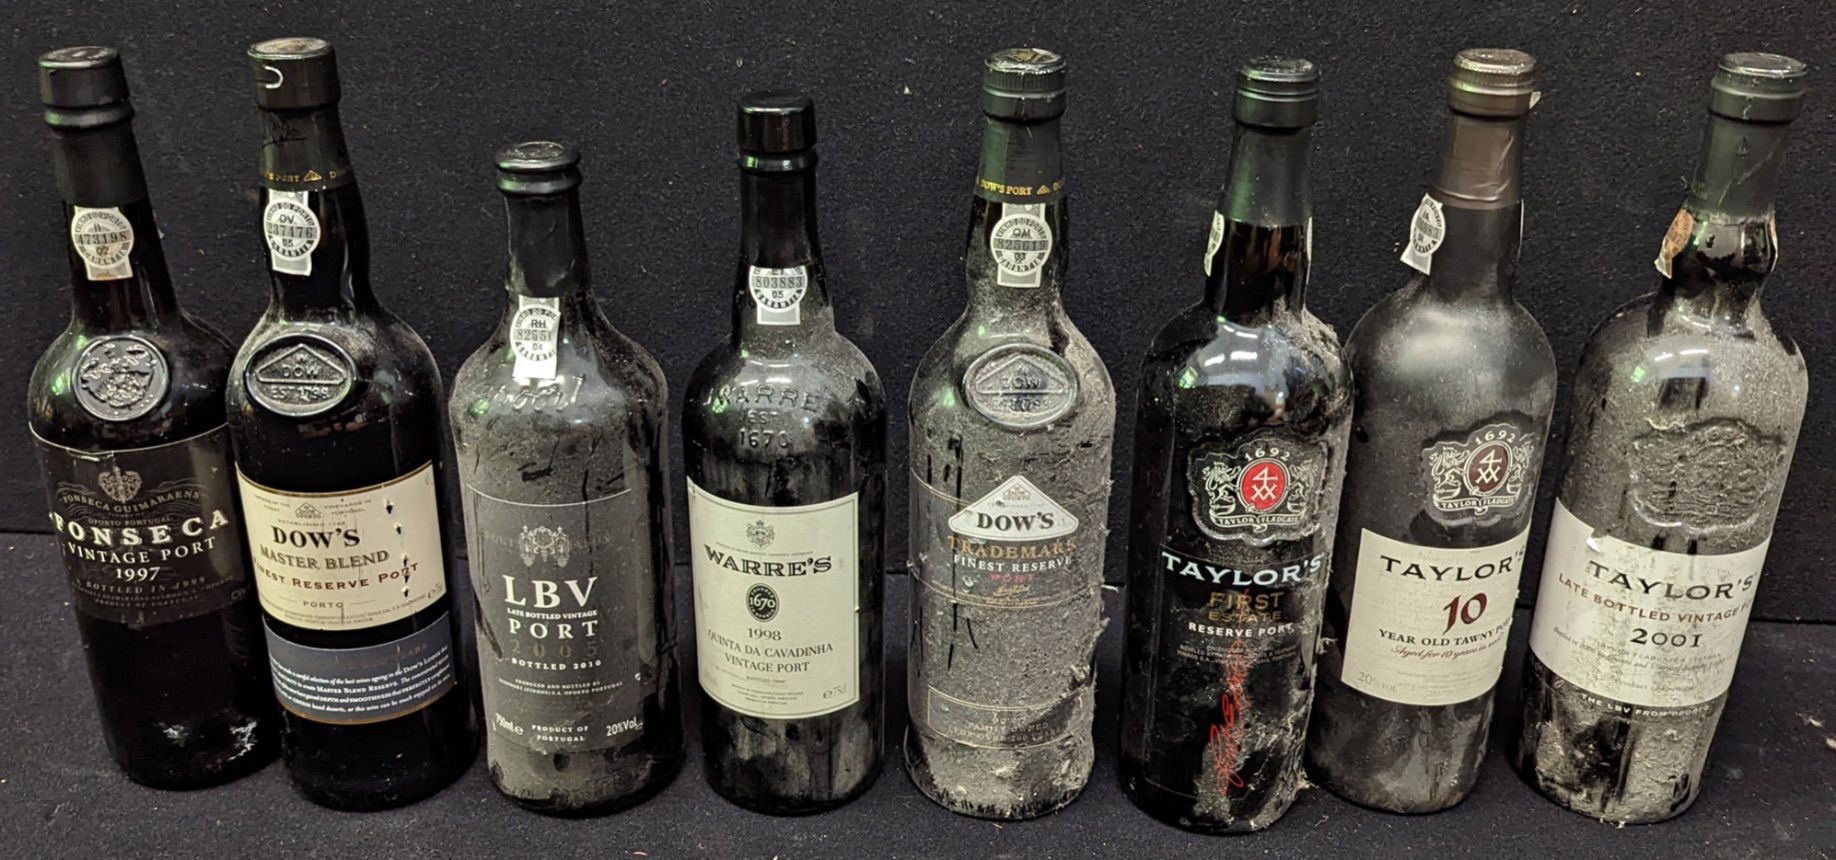 Taylors 8 bottles of Port to include Taylor's, Dow's, Warre's etc.